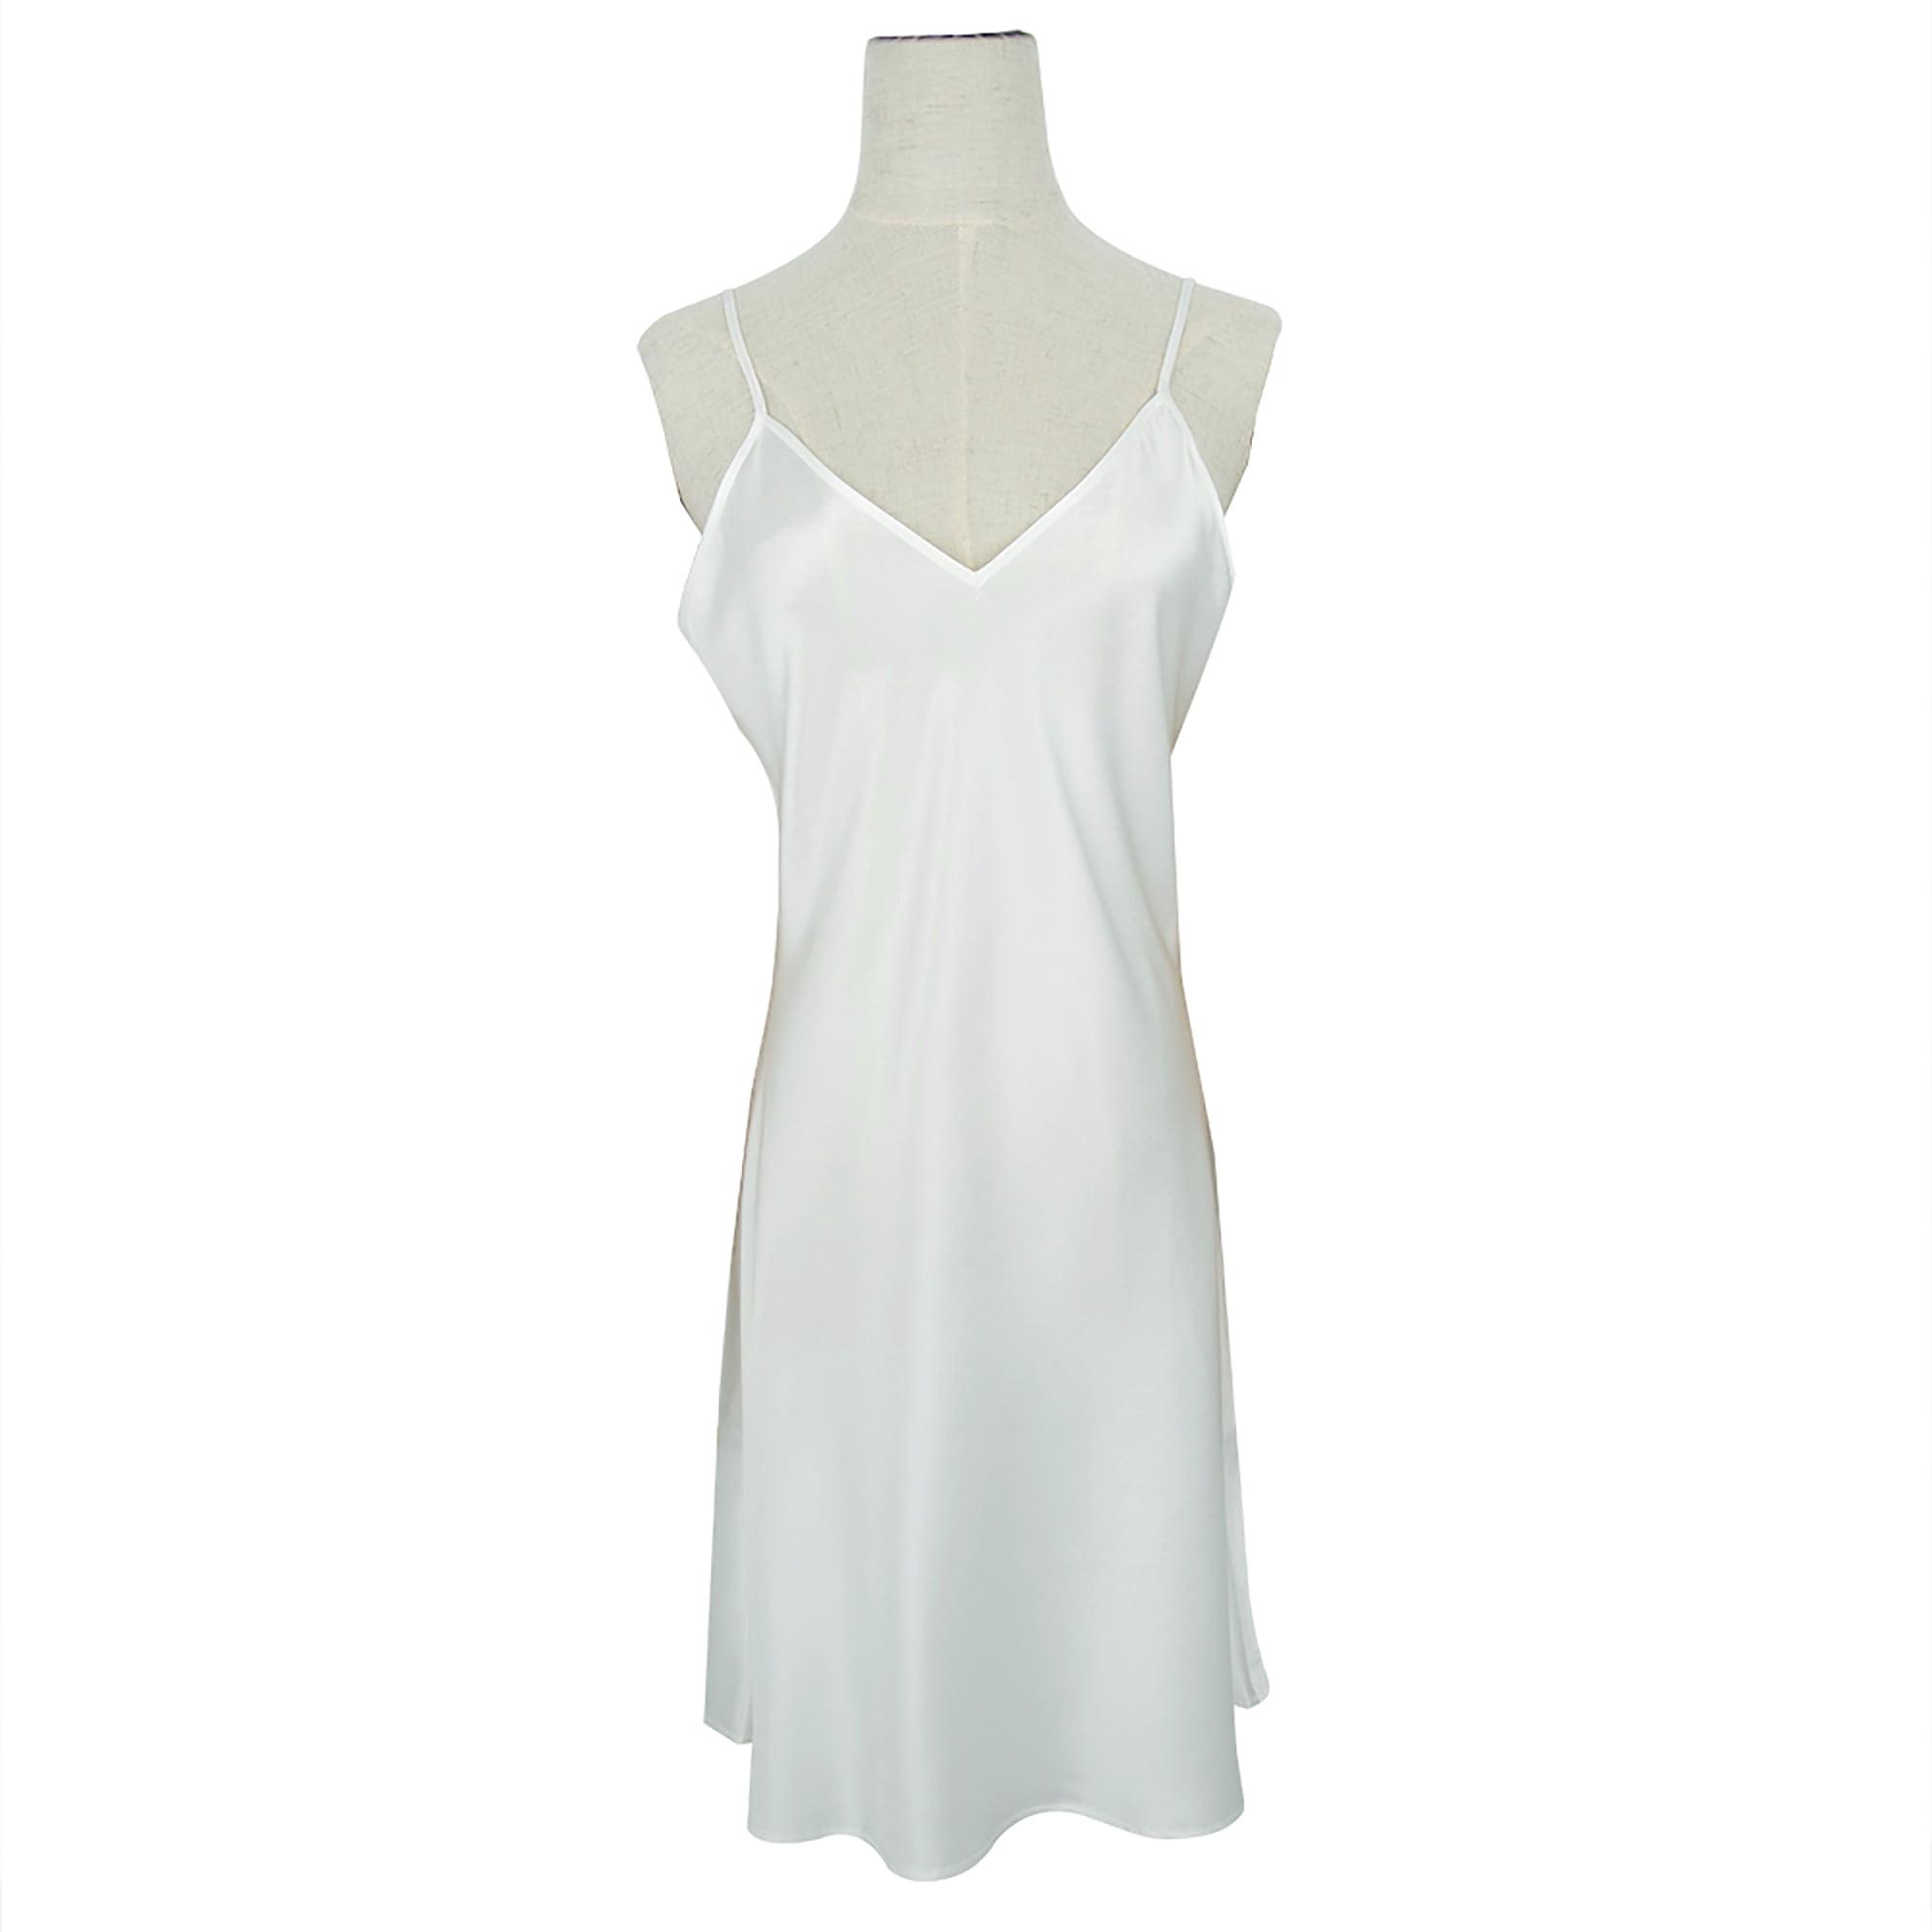 Mulberry Silk Nightgown Lingerie ...